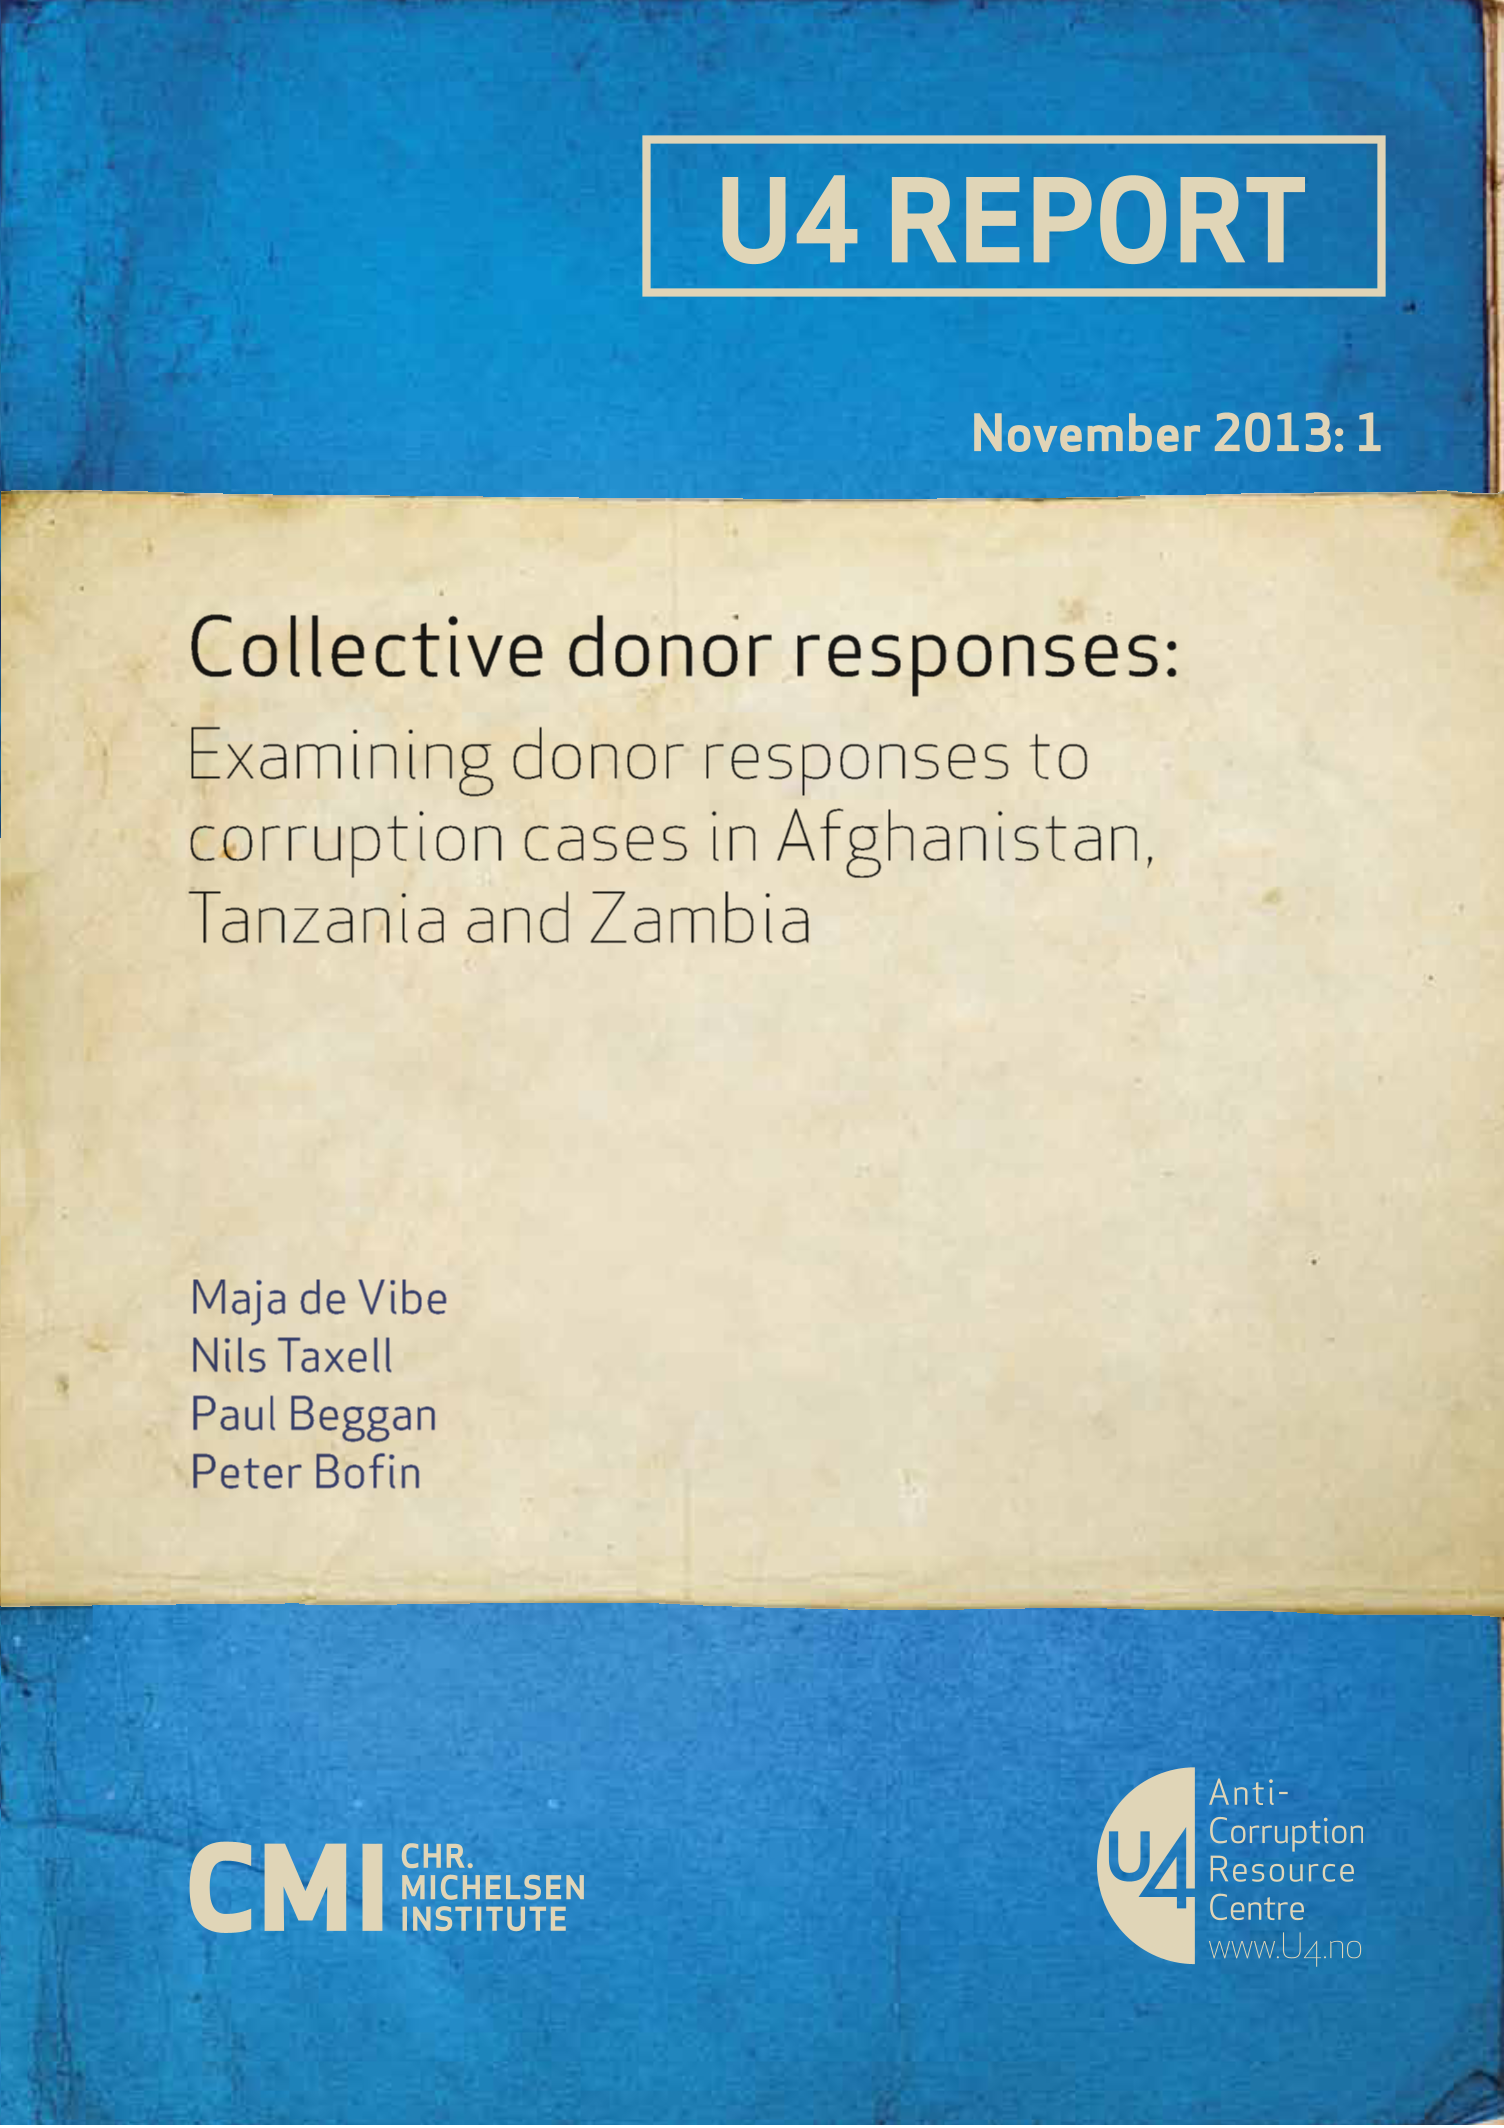 Collective donor responses: Examining donor responses to corruption cases in Afghanistan, Tanzania and Zambia